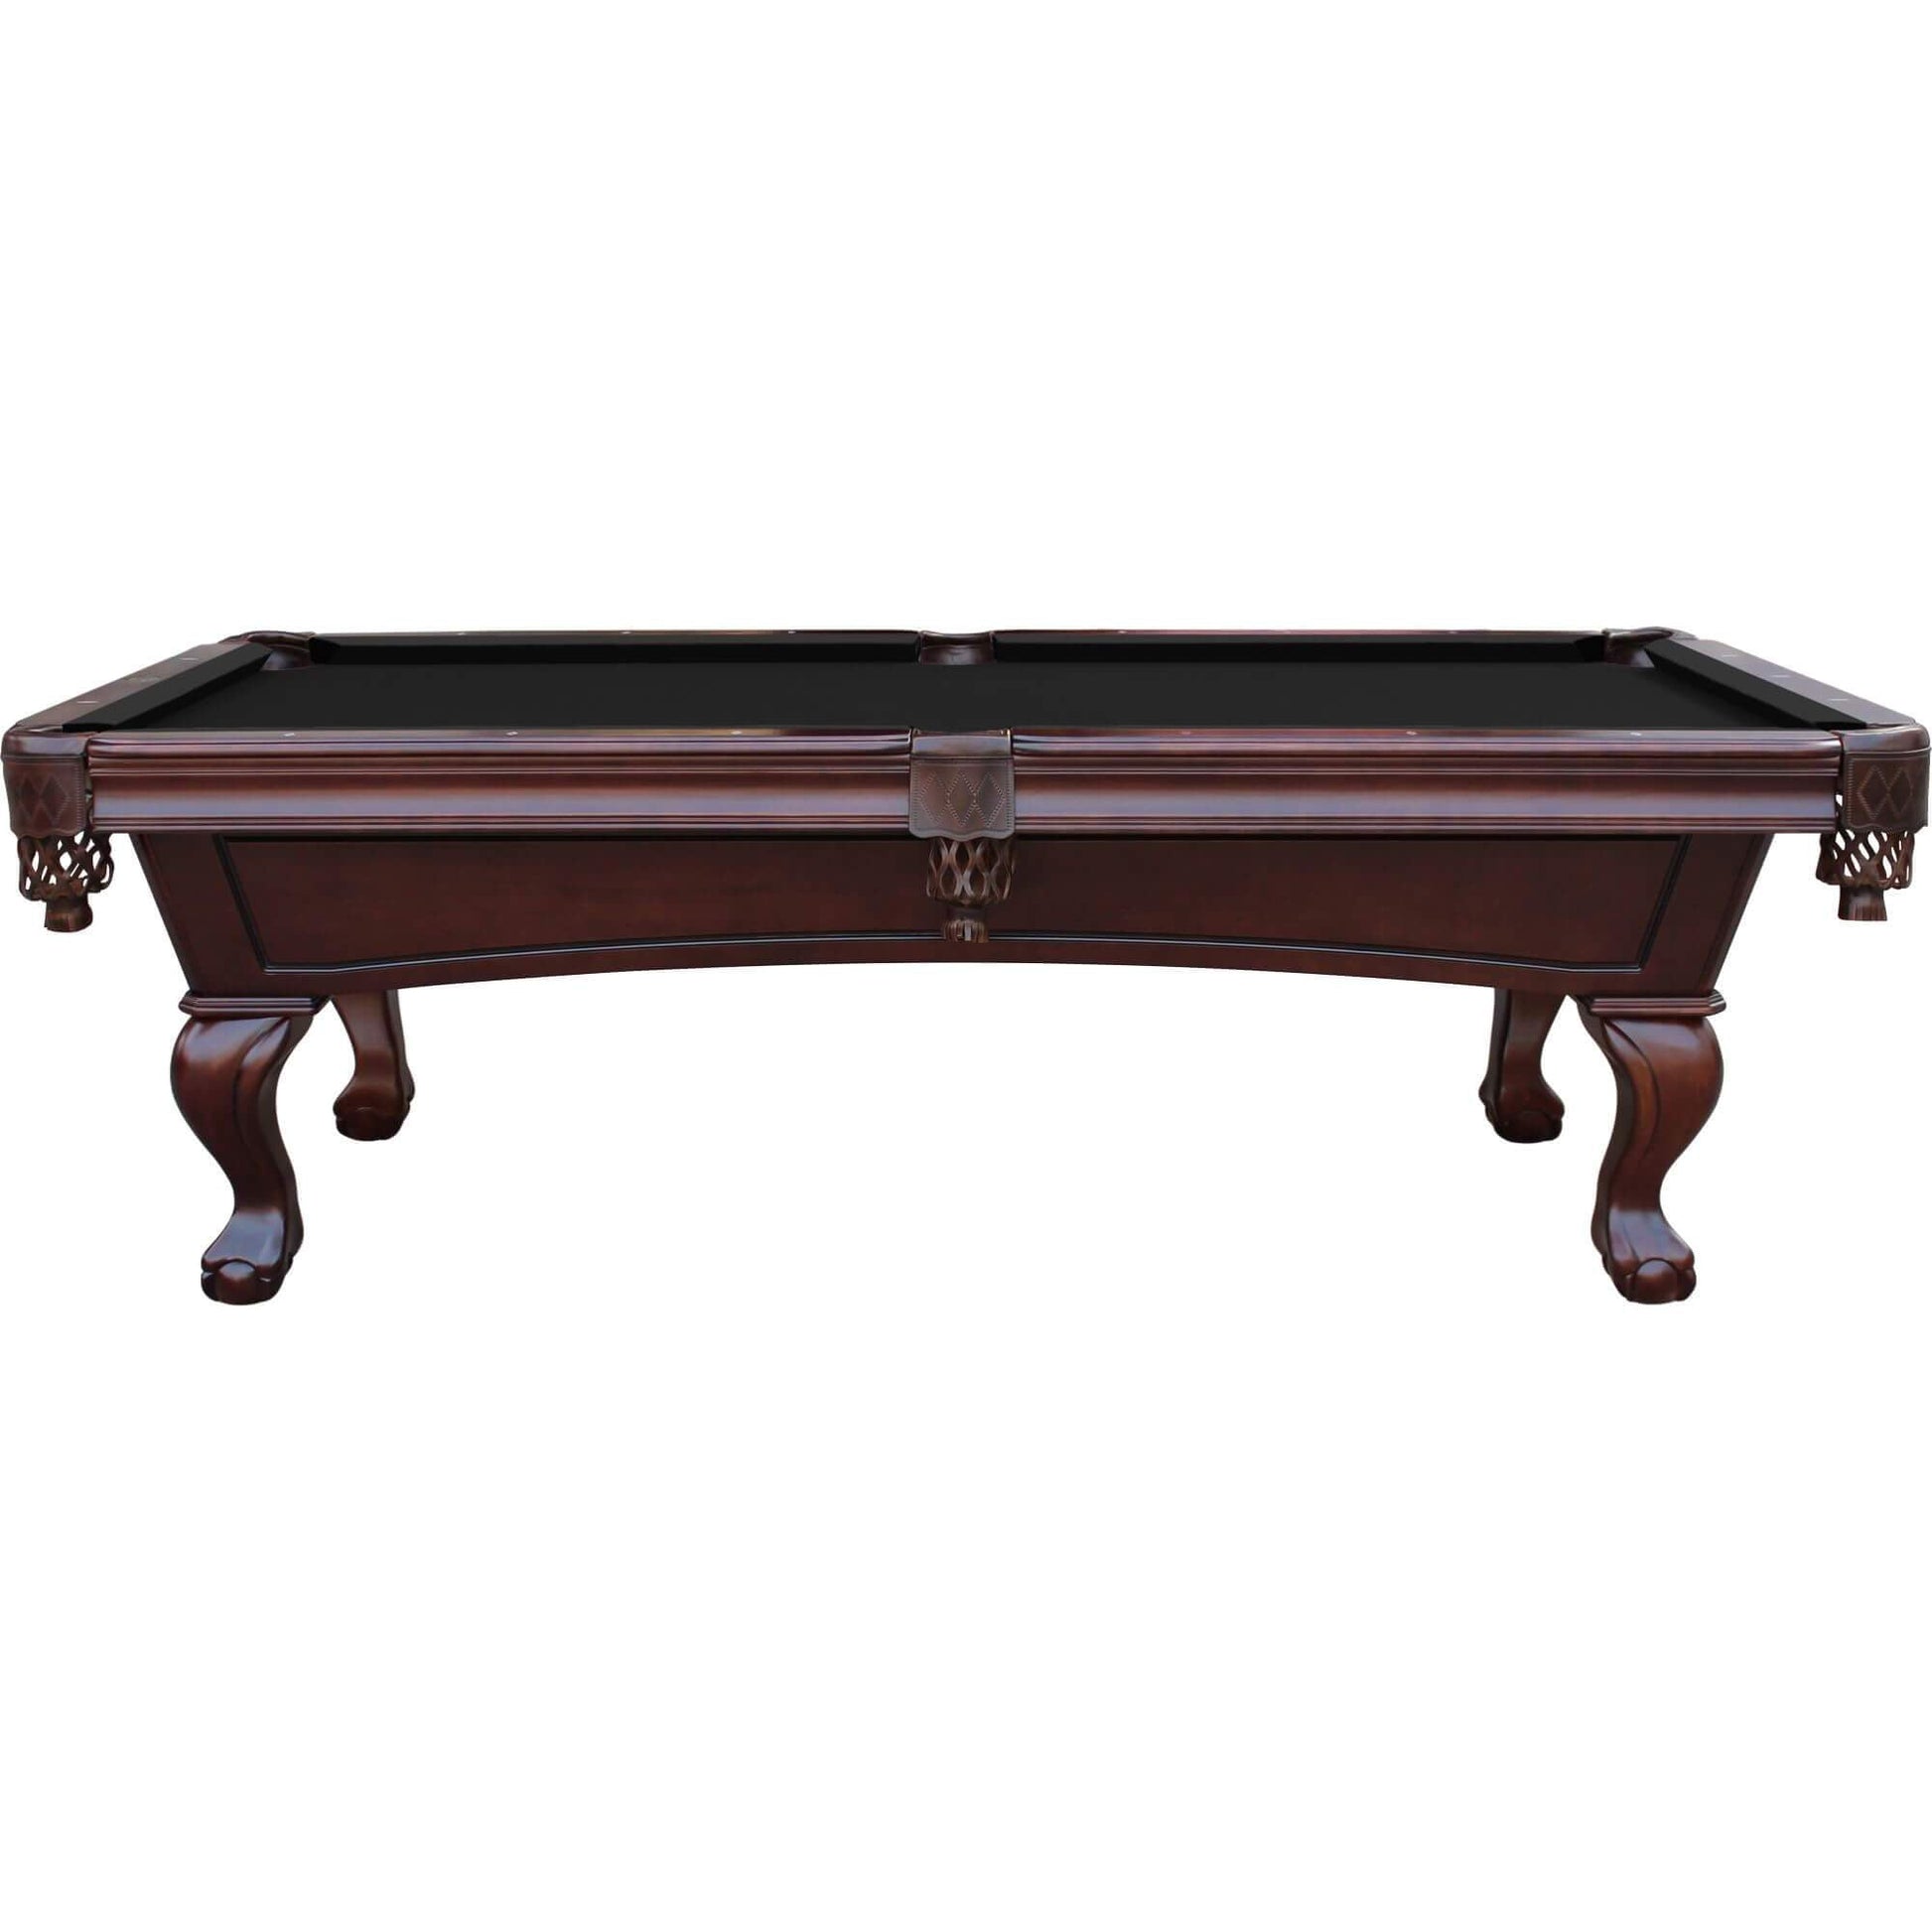 Playcraft Charles River 8' Slate Pool Table with Leather Drop Pockets - Upper Livin